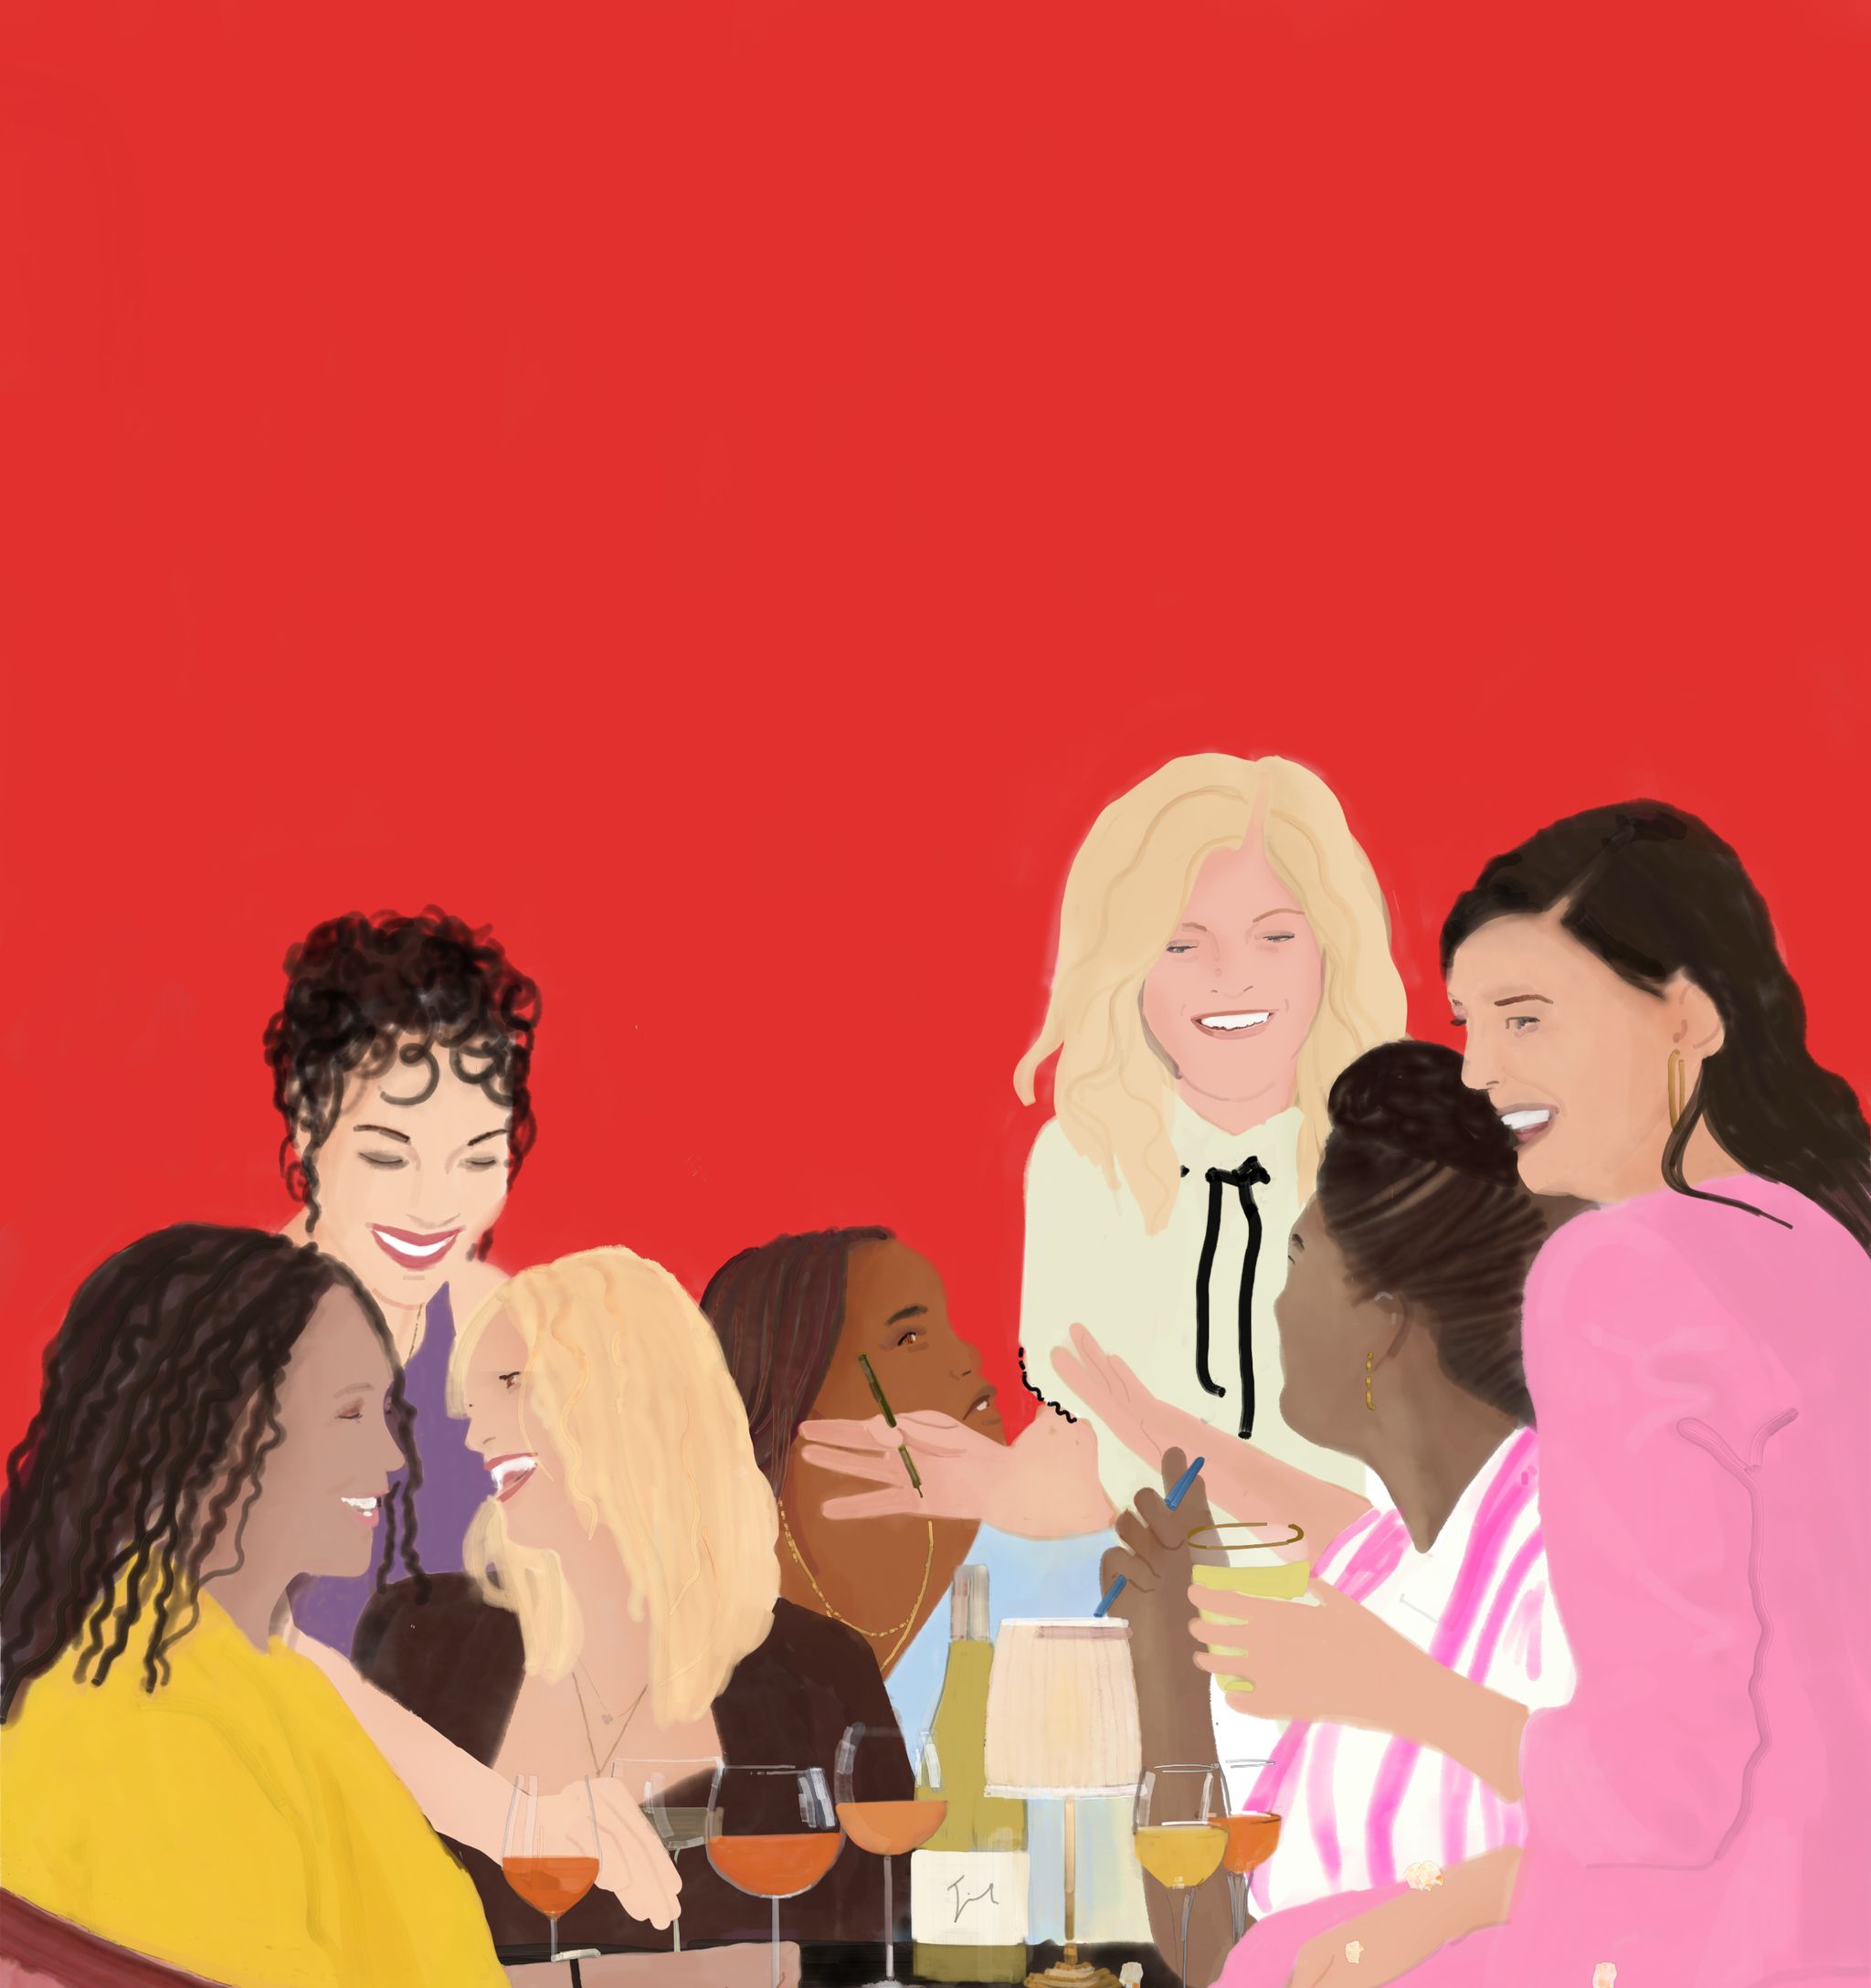 an illustration of a group of women sitting around a table